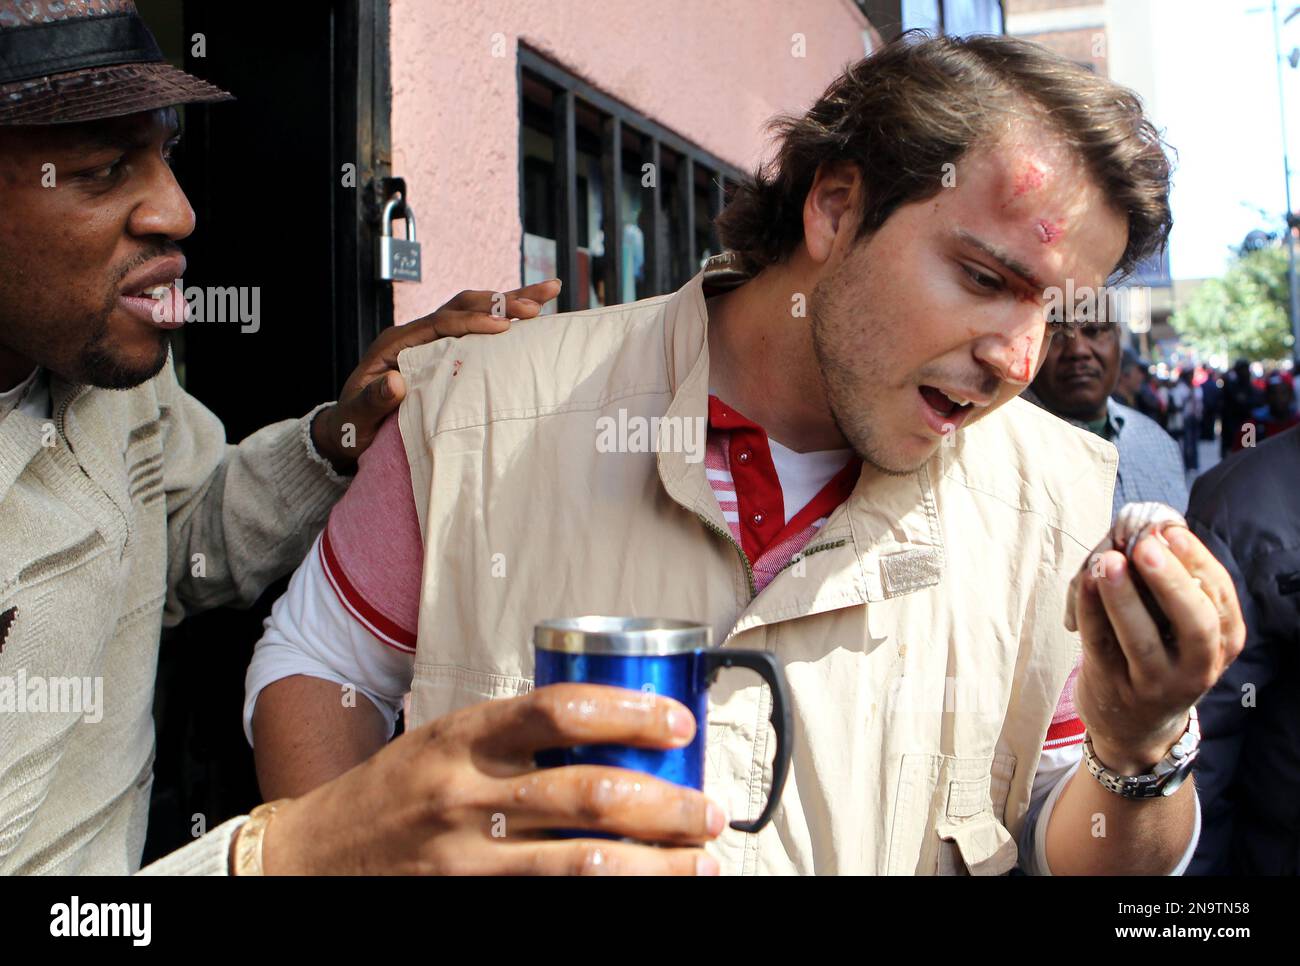 South Africa's M&G journalist Nickolaus Bauer is assisted by a shop owner after being hit by a stone during a protest by opposition party Democratic Alliance (DA) supporters against the Congress of South African Trade Unions (Cosatu) for opposing the youth wage subsidy in Johannesburg, South Africa on Tuesday May 15, 2012. An opposition party march in Johannesburg turned violent Tuesday after union supporters hurled rocks at the leader of South Africa's main opposition party. (AP Photo/Themba Hadebe) Stockfoto